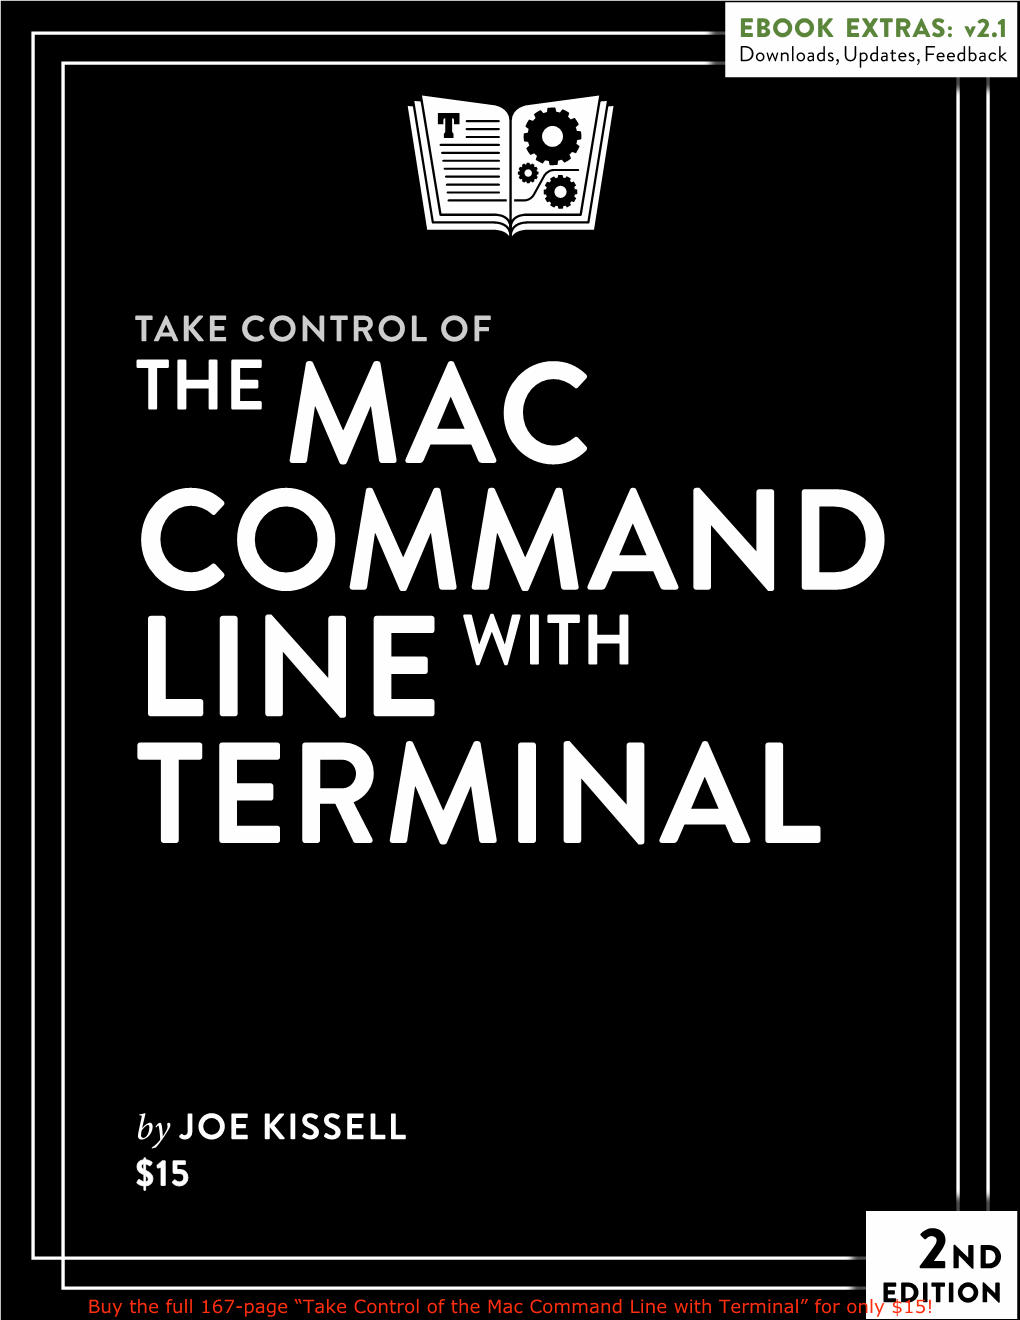 Take Control of the Mac Command Line with Terminal (2.1) SAMPLE